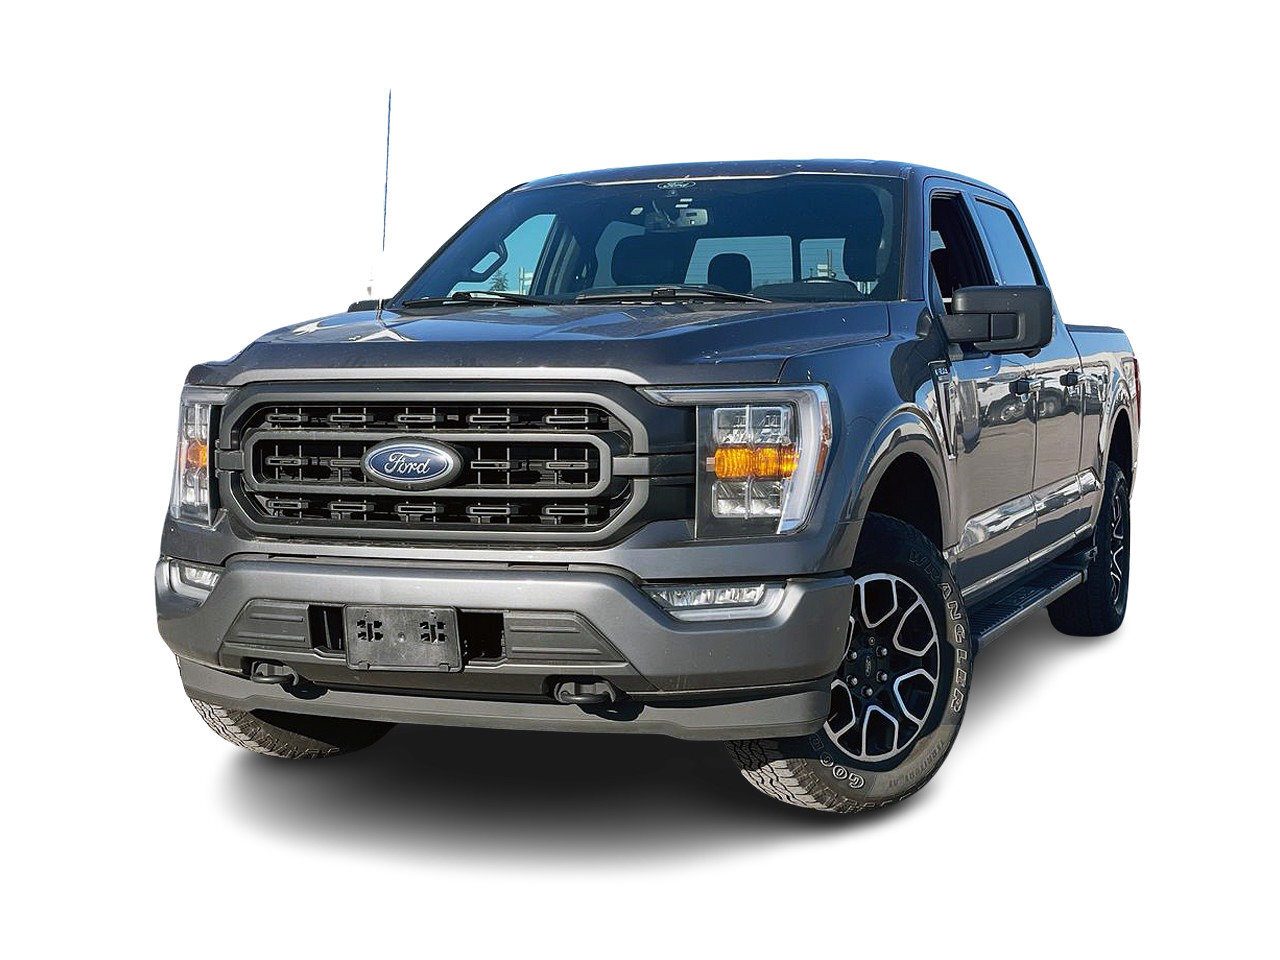 2021 Ford F-150 4x4 - Supercrew XLT - 157 WB Remote Starter | Tow 